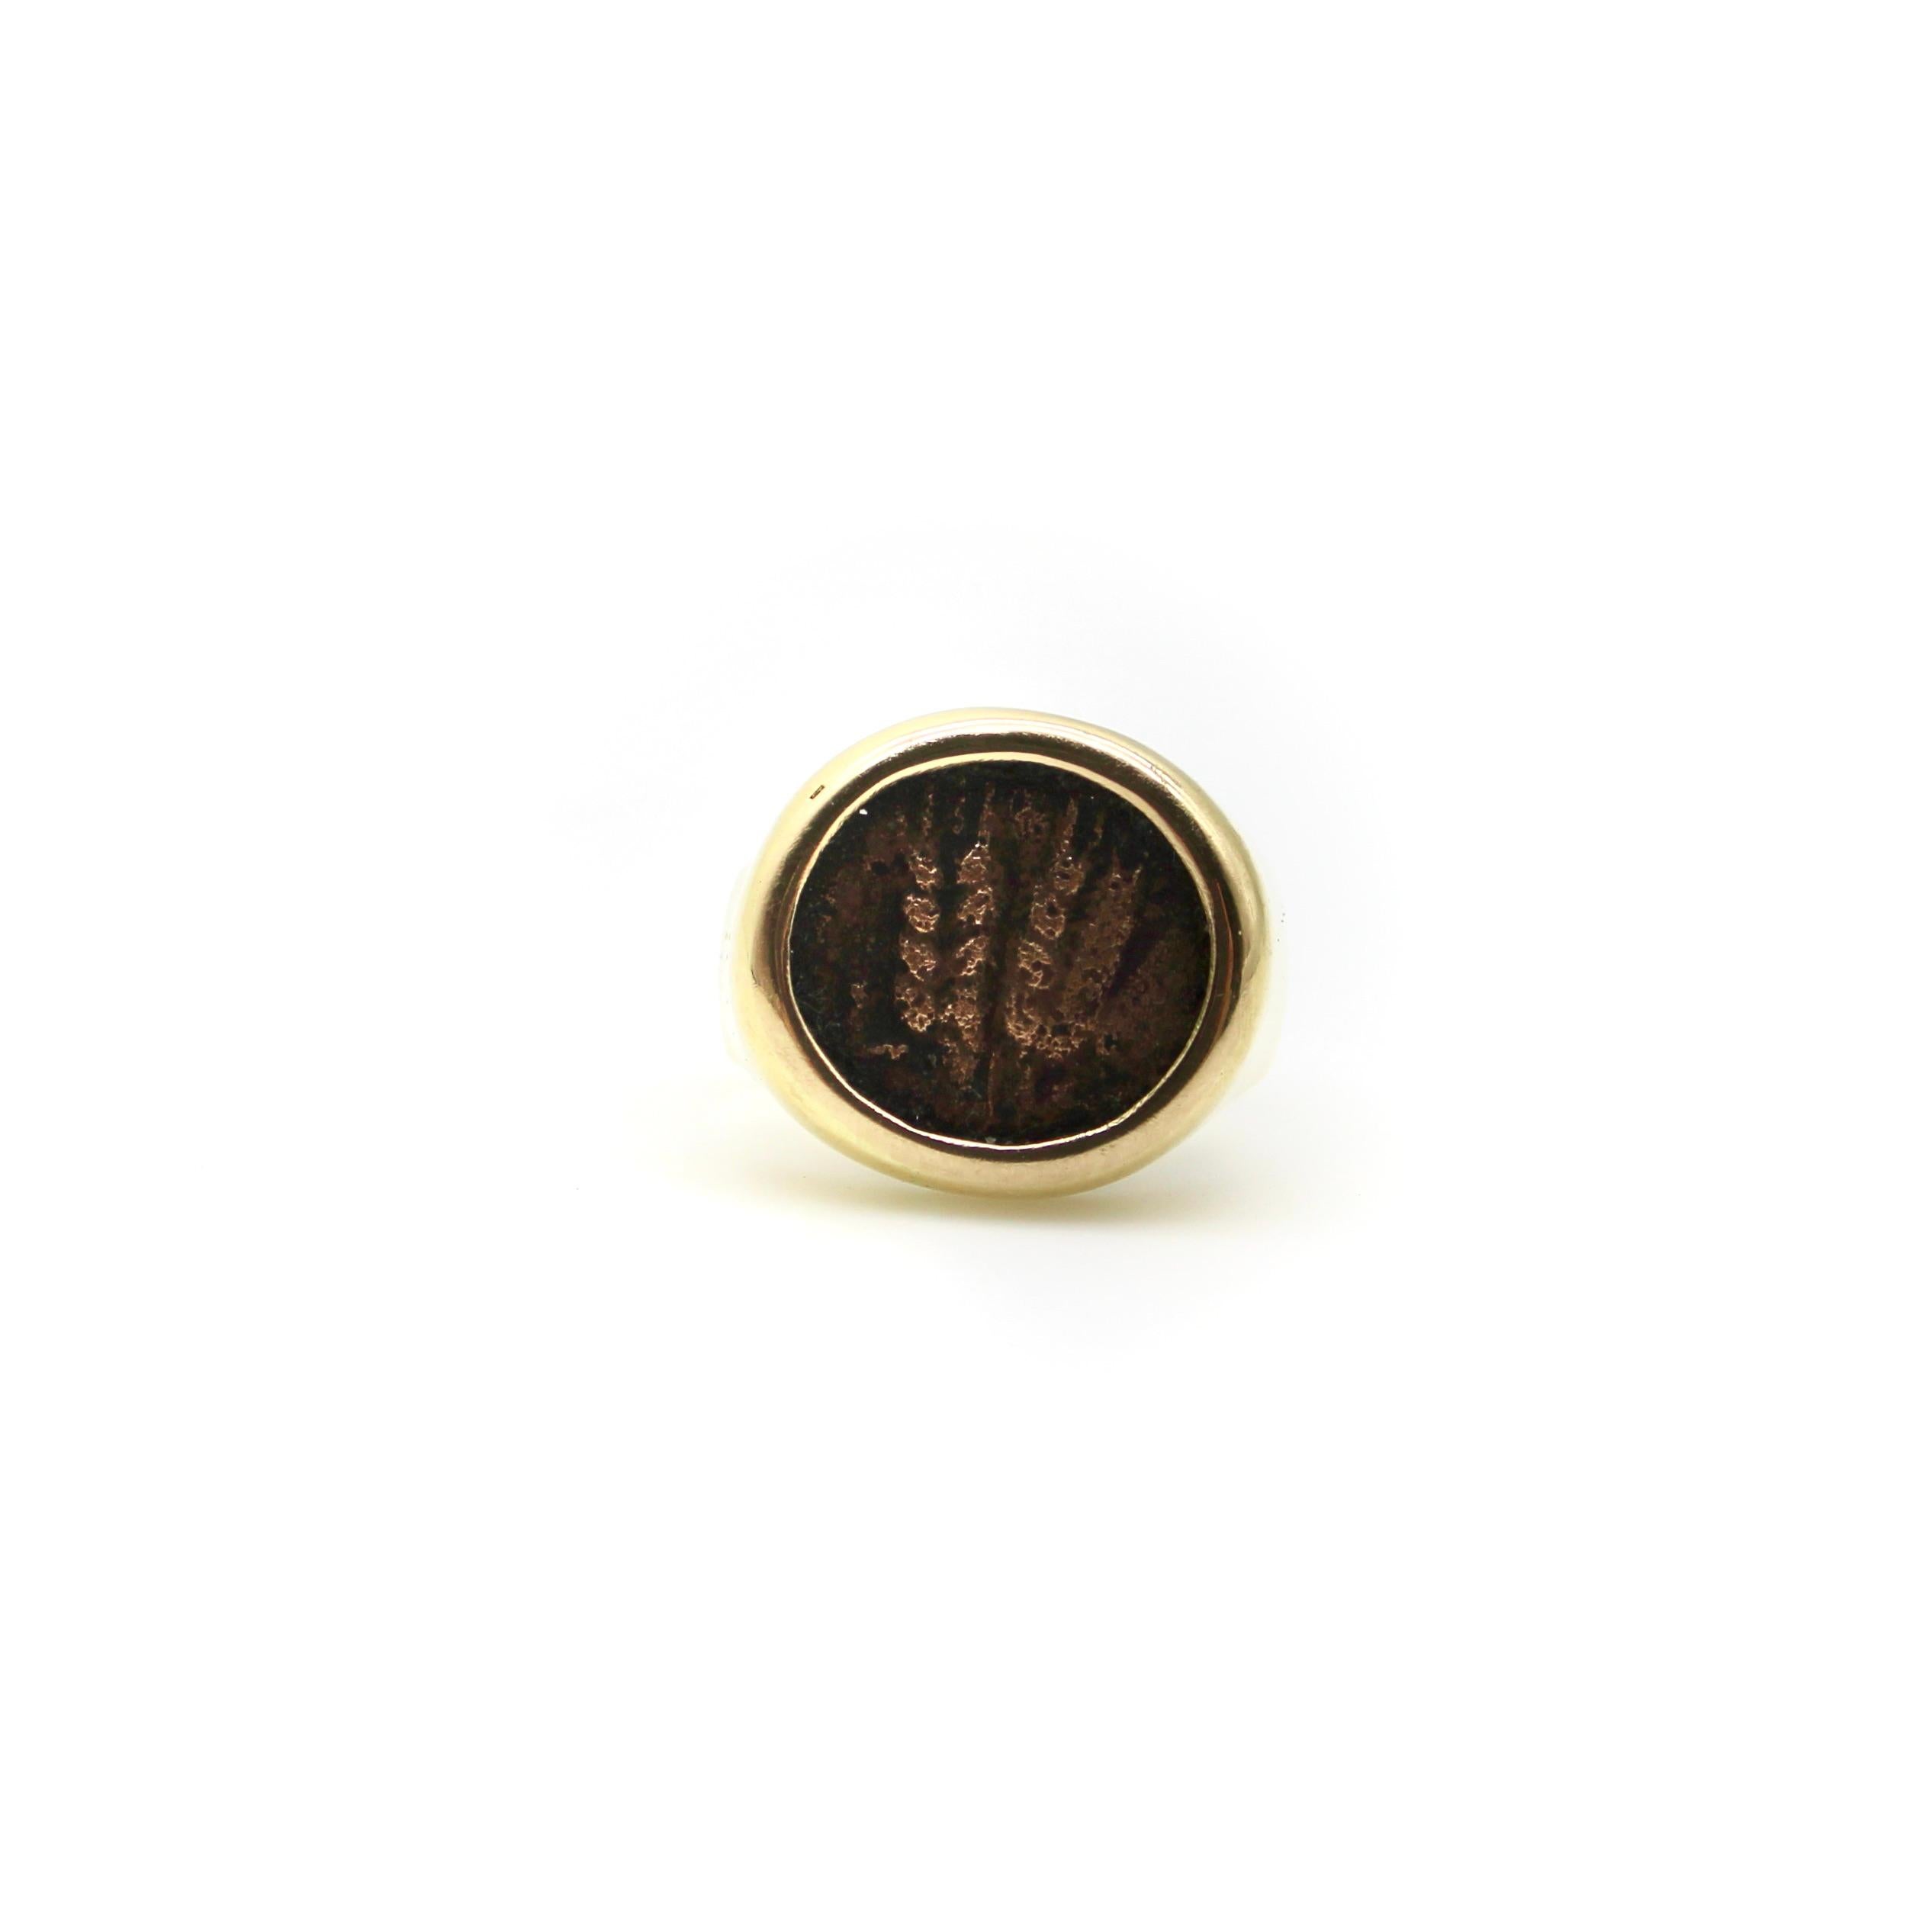 This 14k gold ring features an ancient coin that was minted in Jerusalem in 42 A.D.  The coin was minted during the reign of Herod Agrippa I—the grandson of Harod the Great—who ruled over the entire country of Israel and Northern Transjordan. The